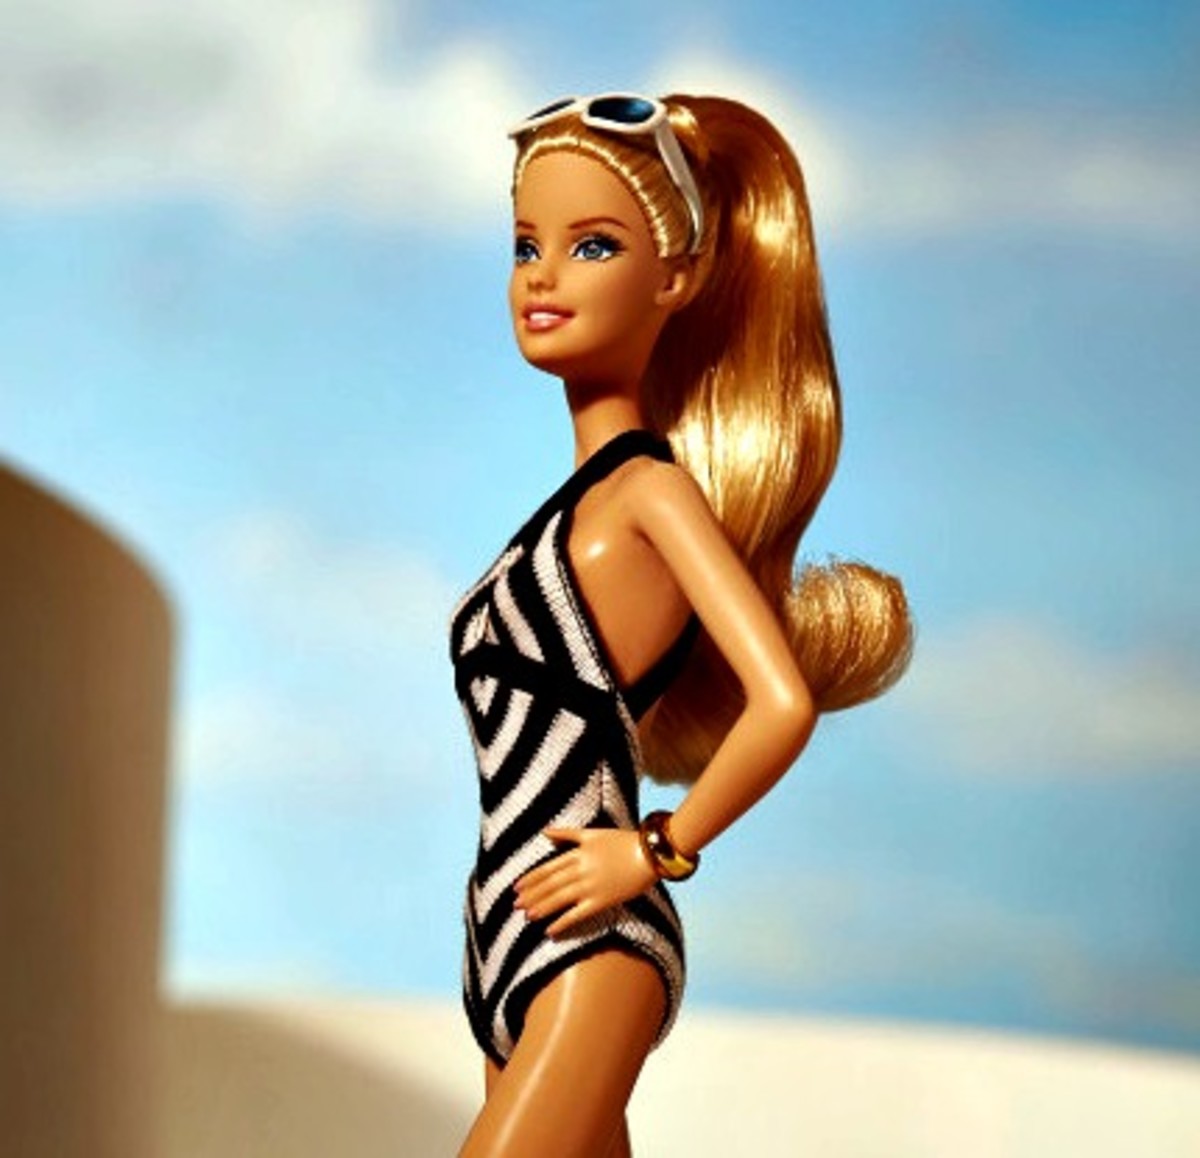 Is Barbie On Her Way Out Or The New Poster Girl For Self-Love? www.TodaysMama.com #unapologetic